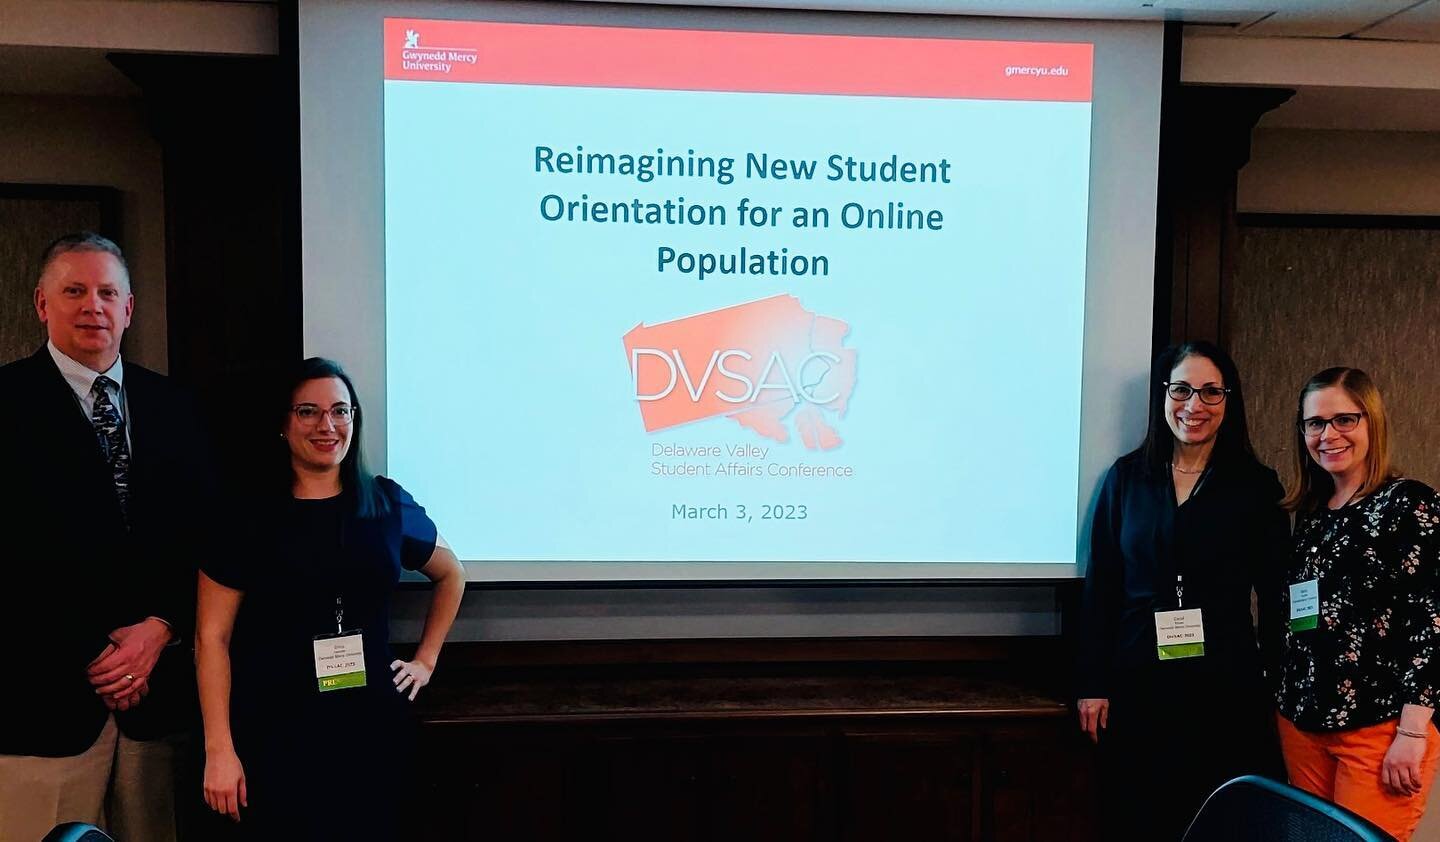 DVSAC 2023 breakout session: Reimagining New Student Orientation for an Online Student Population. Presented by Mike Hertel, Erica Dercole, Sarah Smalarz, and Carol Ribner from @gmercyu #DVSAC1974